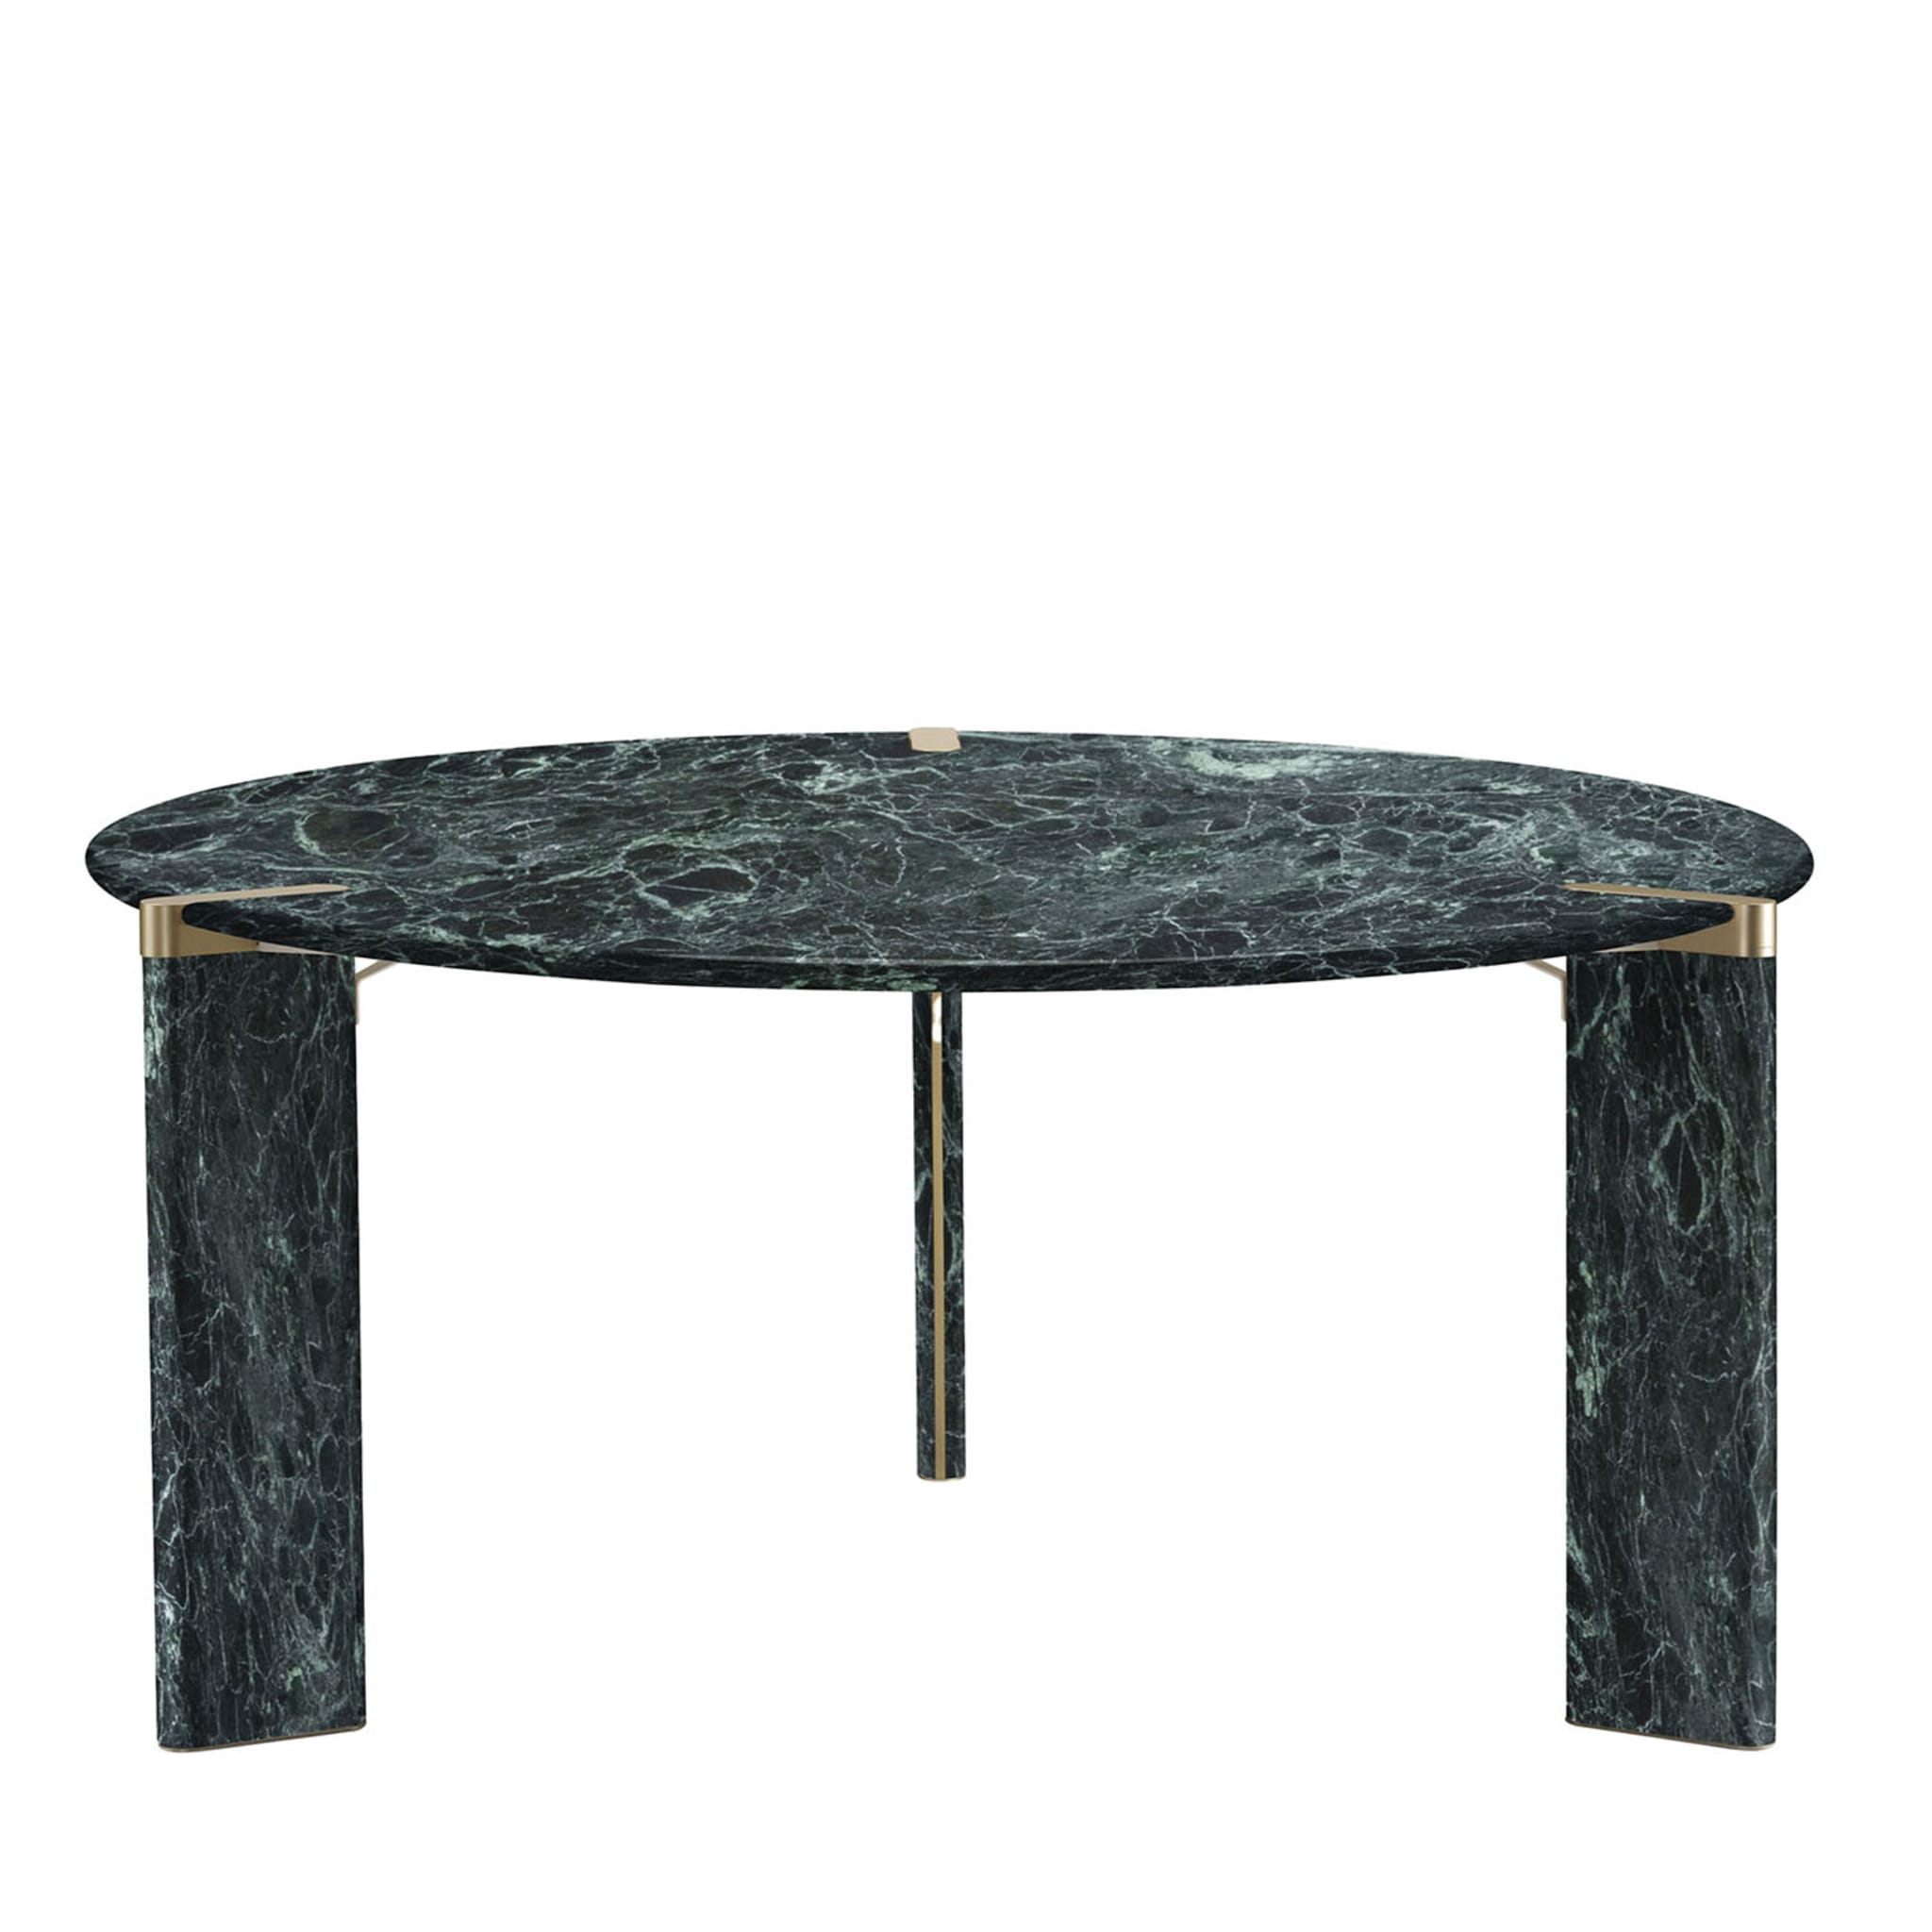 Ottanta Round Green Dining Table by Lorenza Bozzoli - Main view